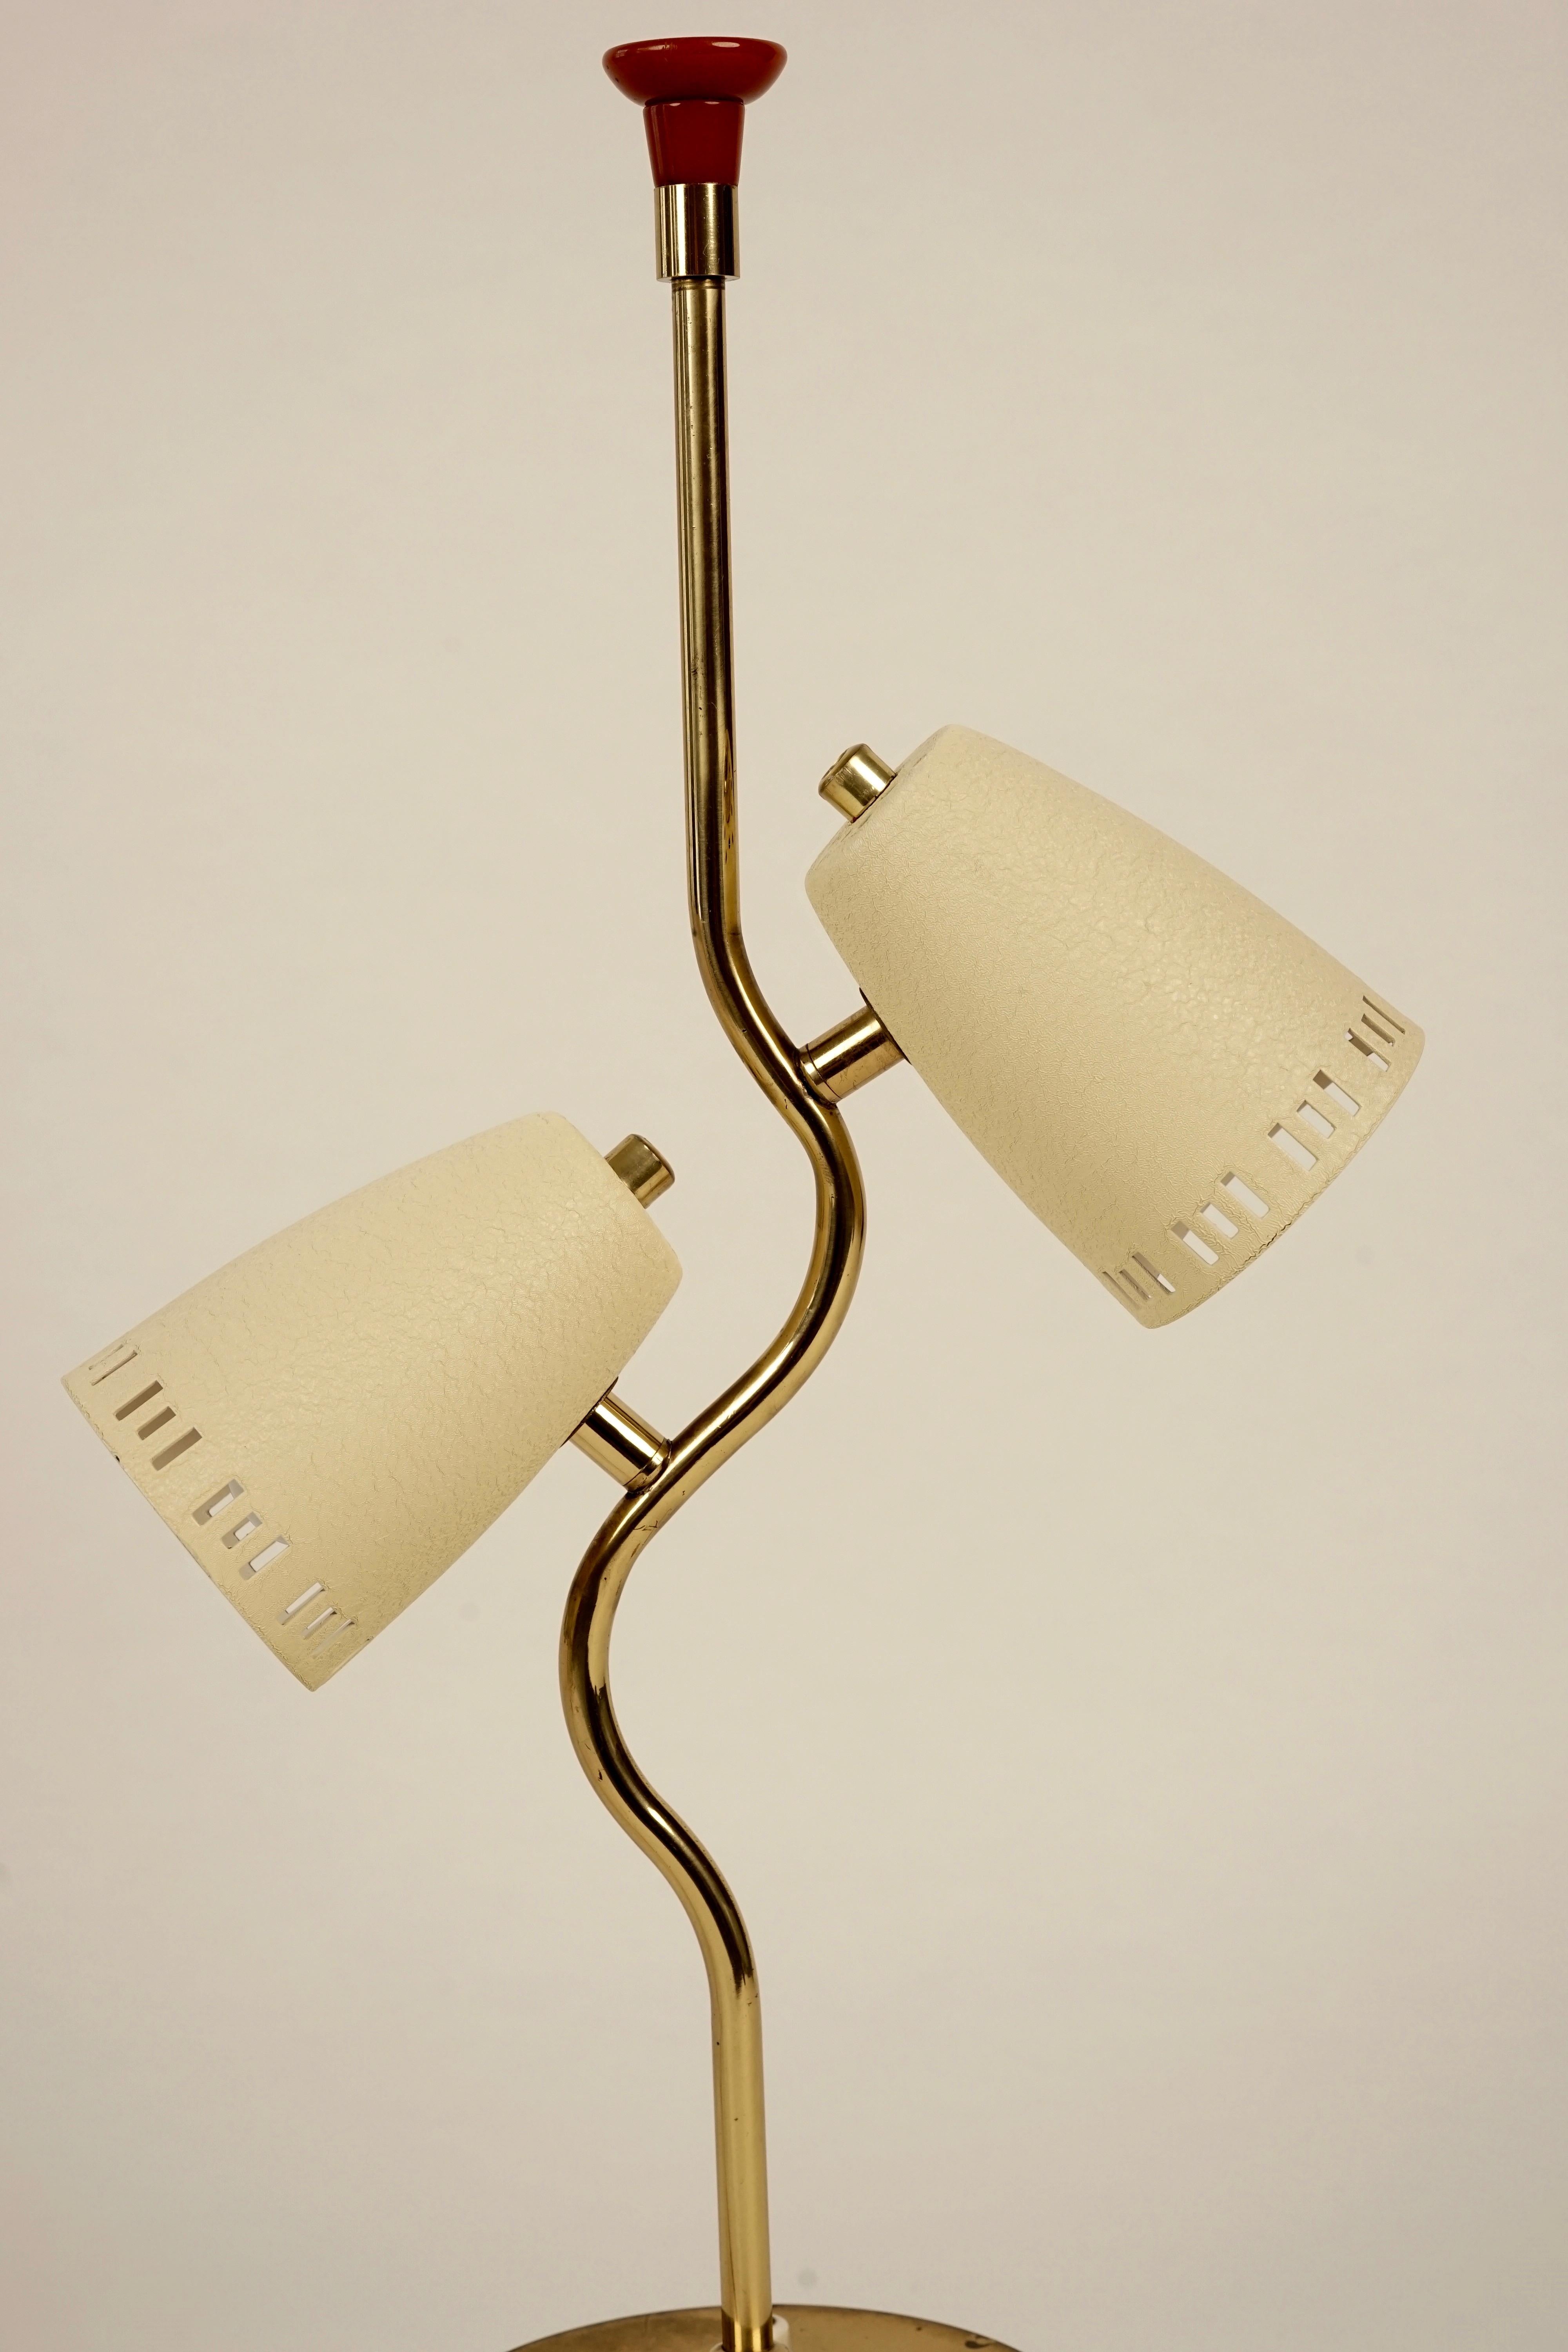 Aluminum Austrian Table Lamps from the 1950s For Sale